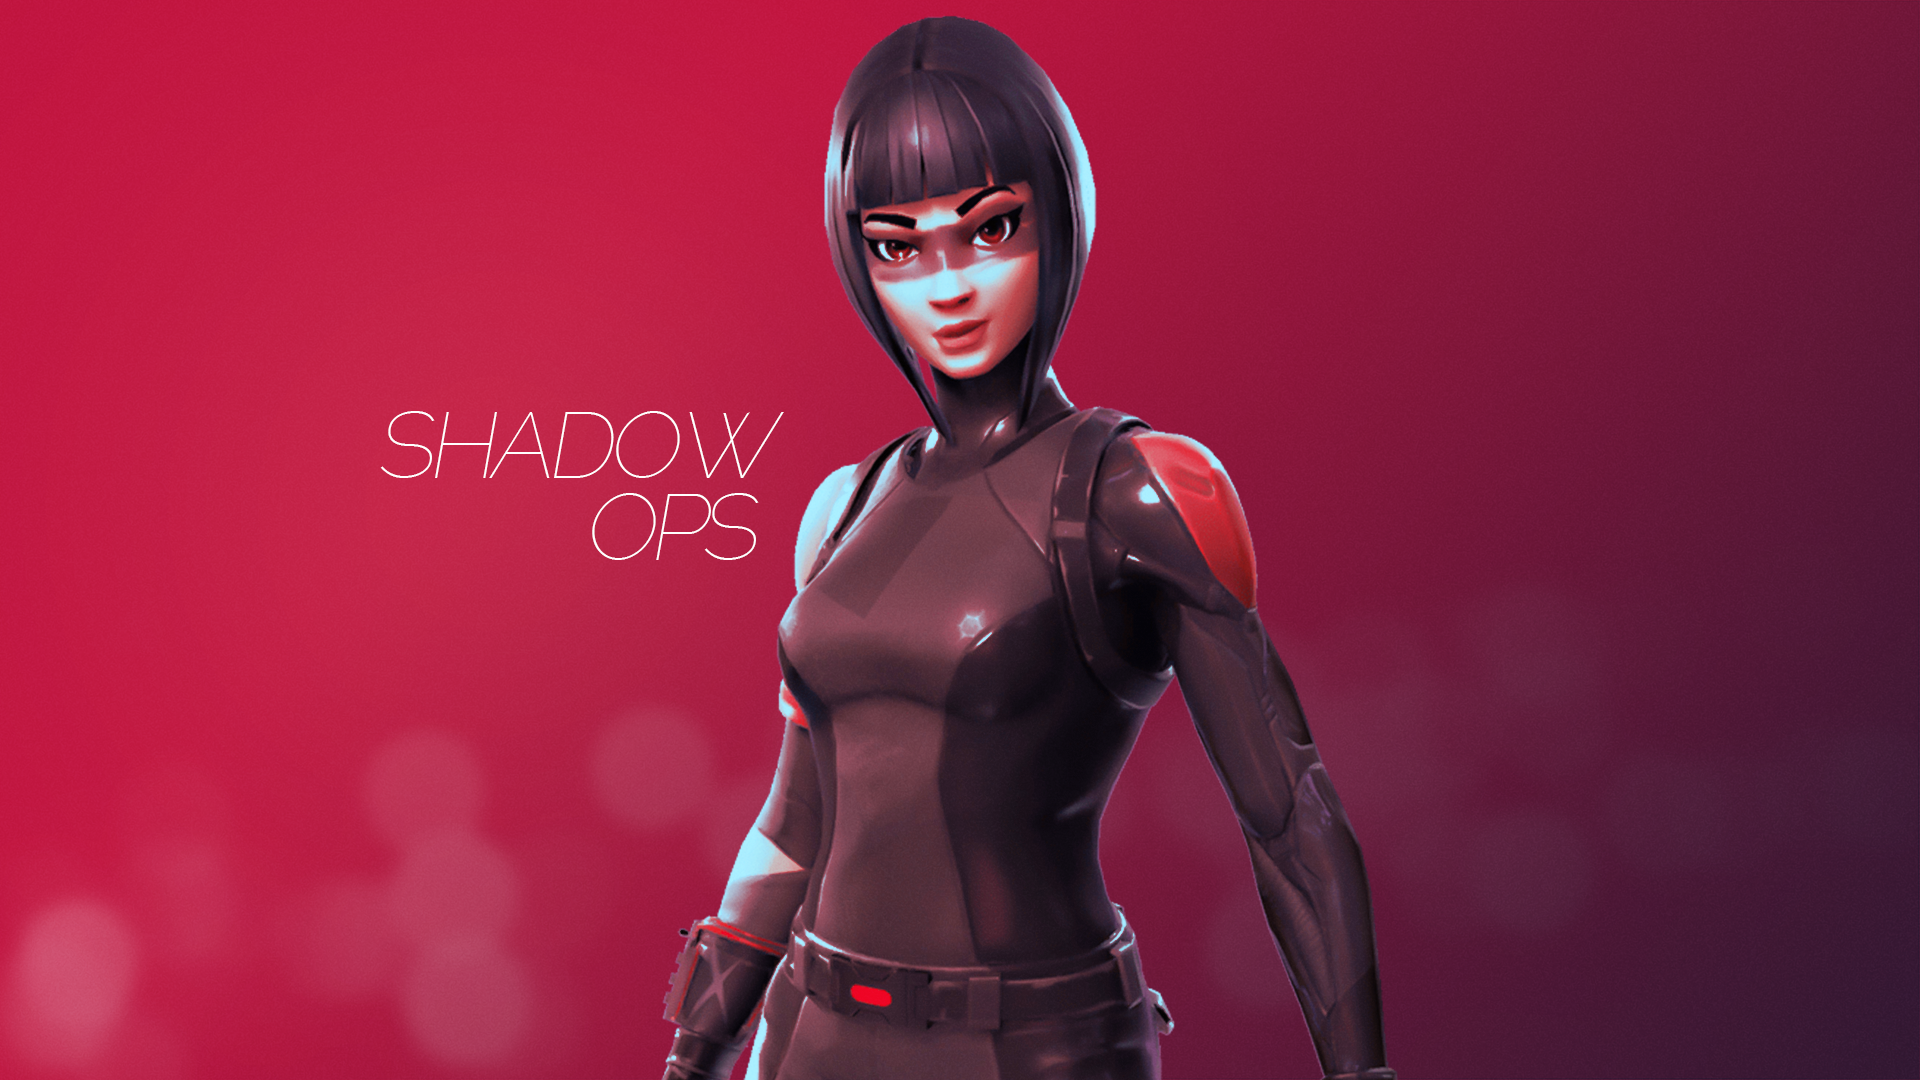 Don't think I'll ever get Shadow Ops but I can at least make a PC